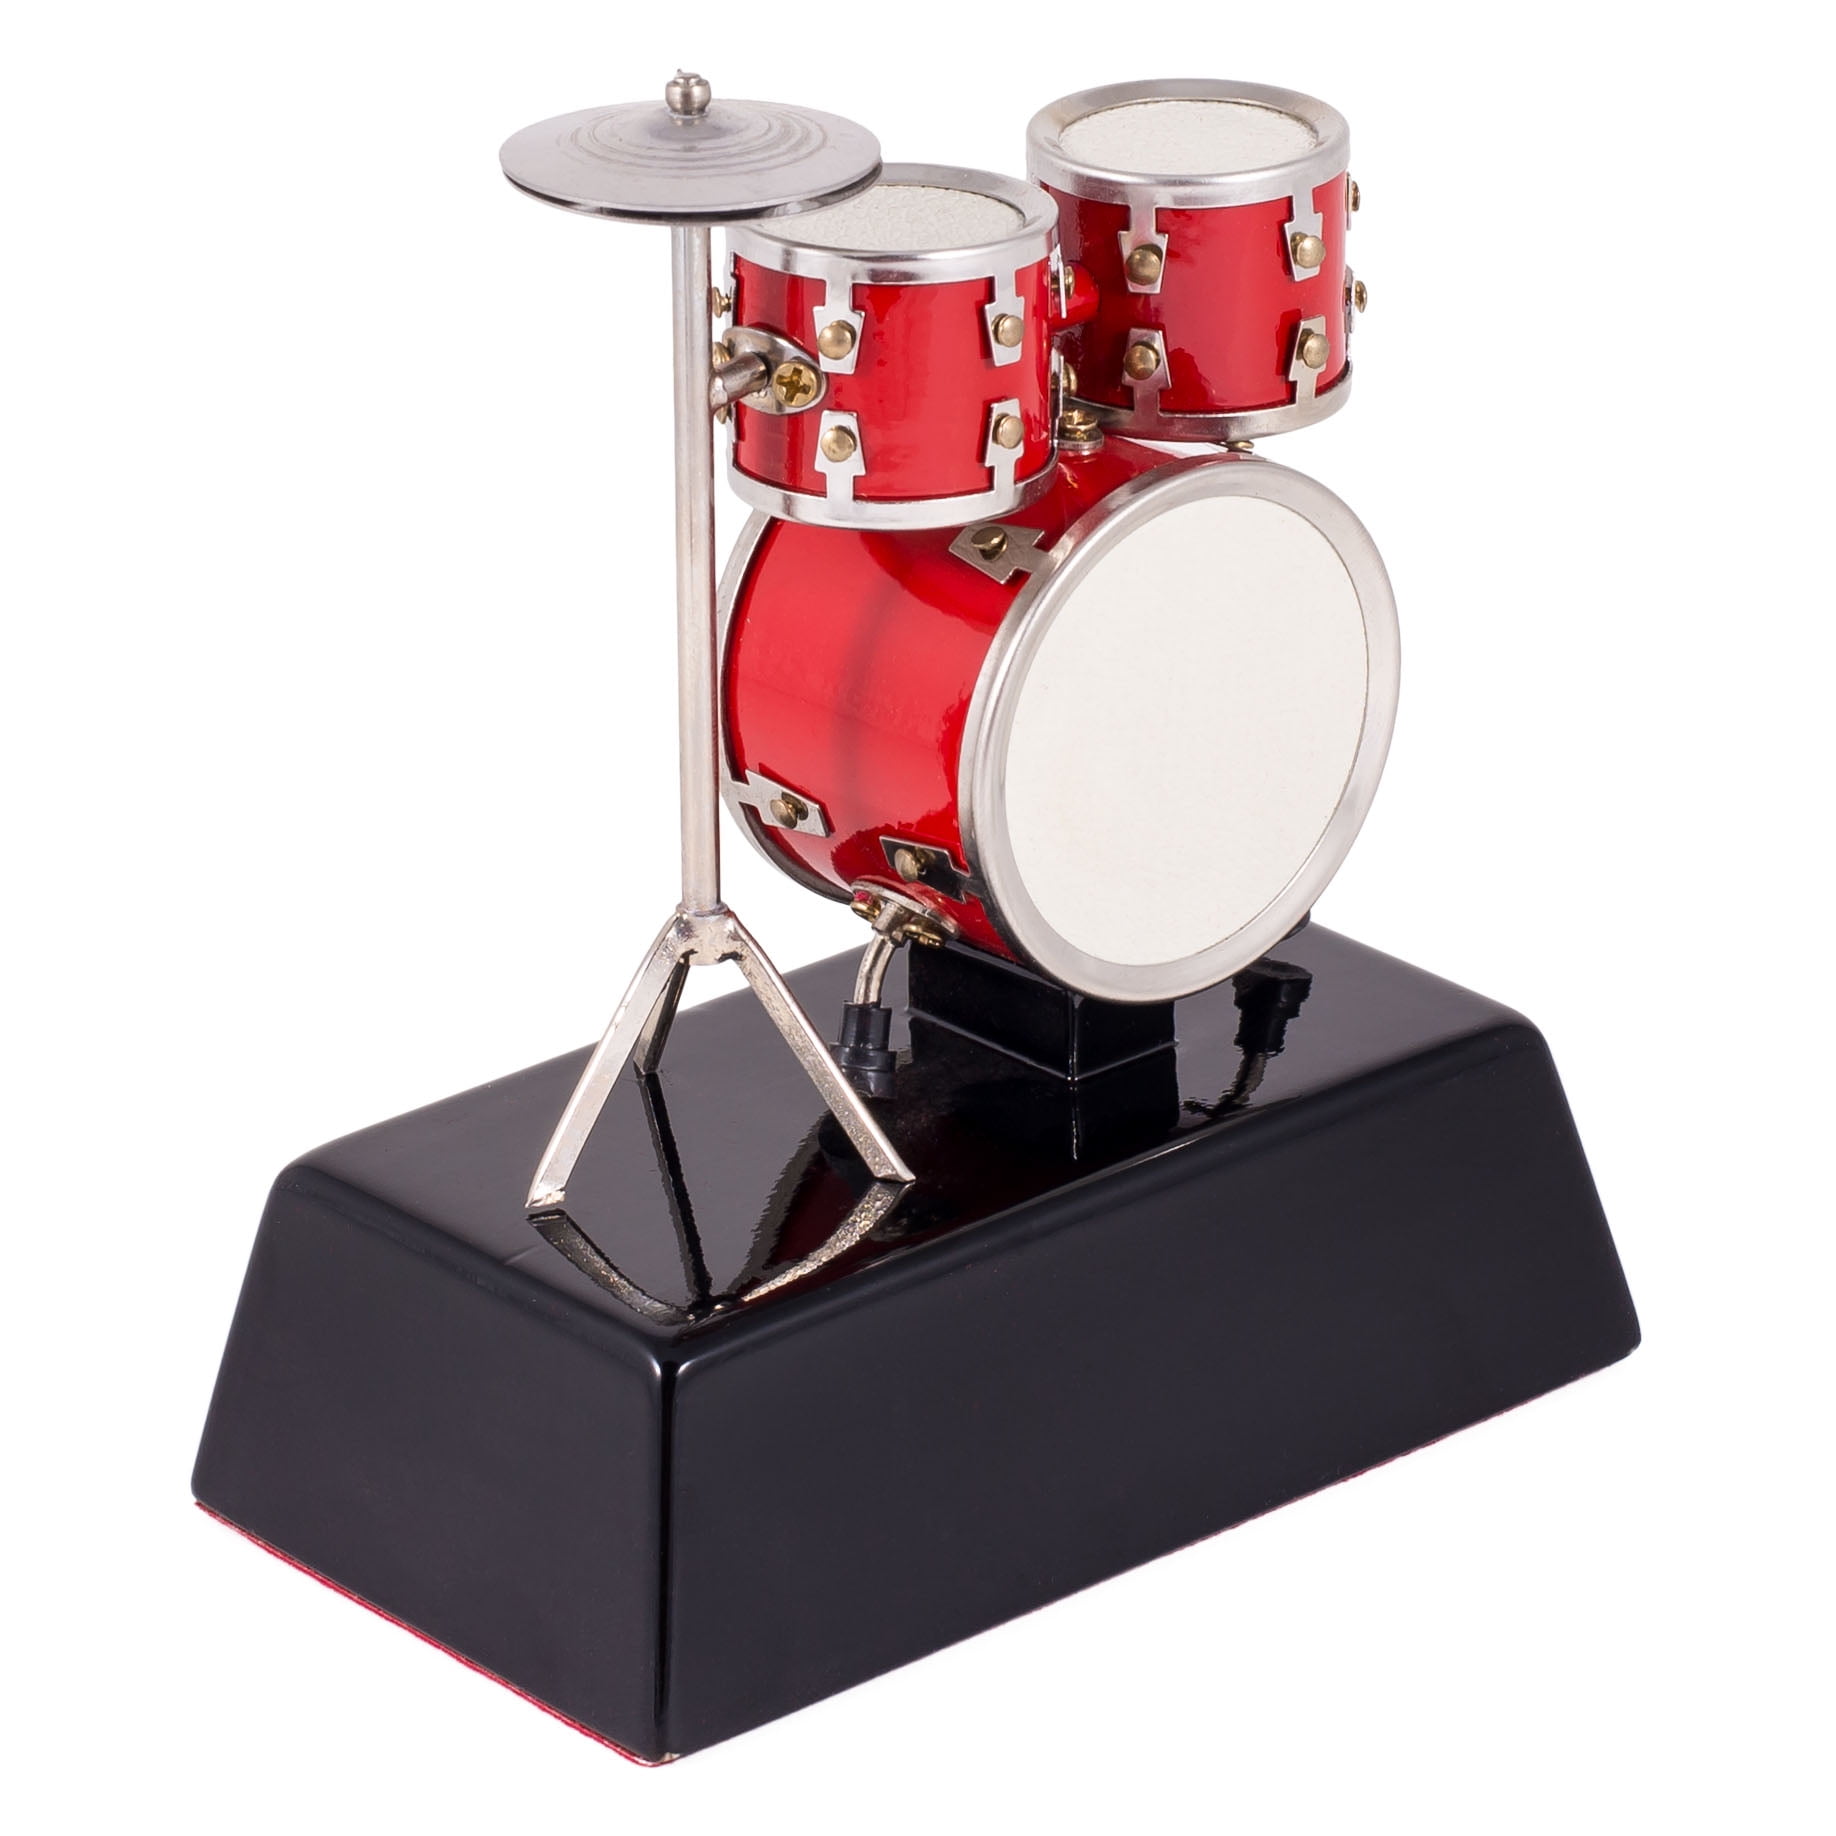 Red Drum Set Music Instrument Miniature Replica on Stand Size 3 in.